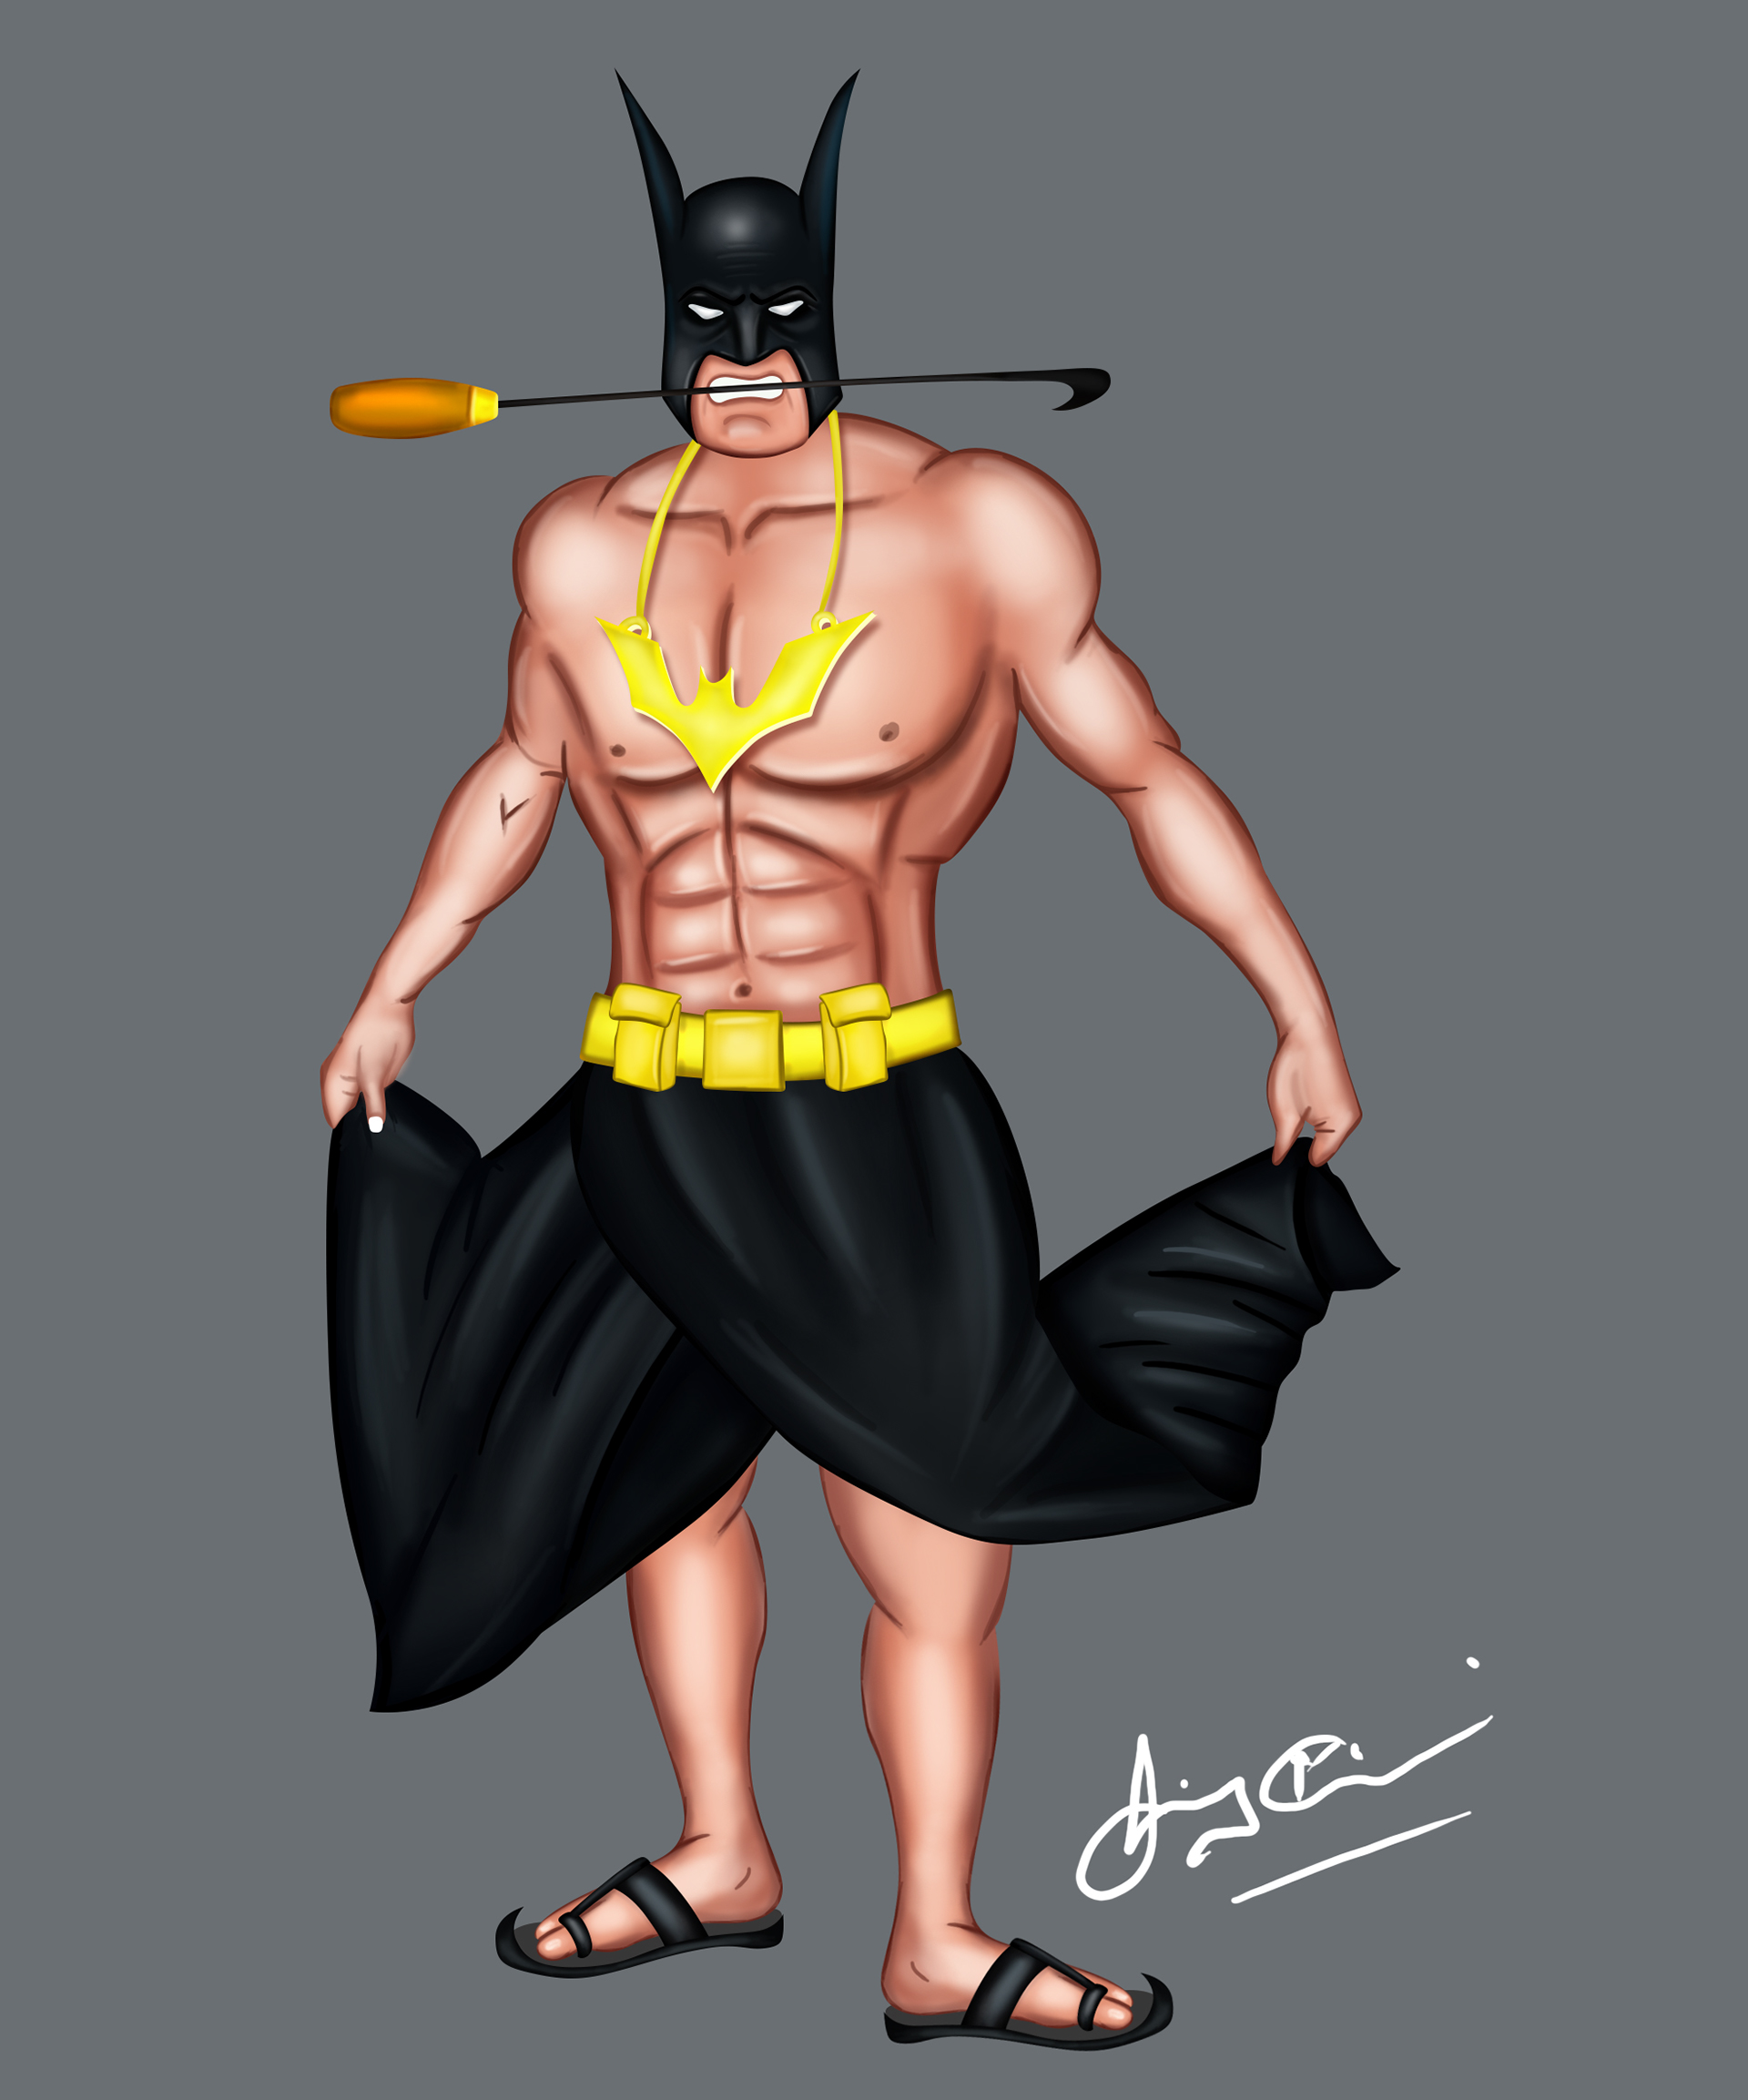 South Indian Batman Character..... on Behance